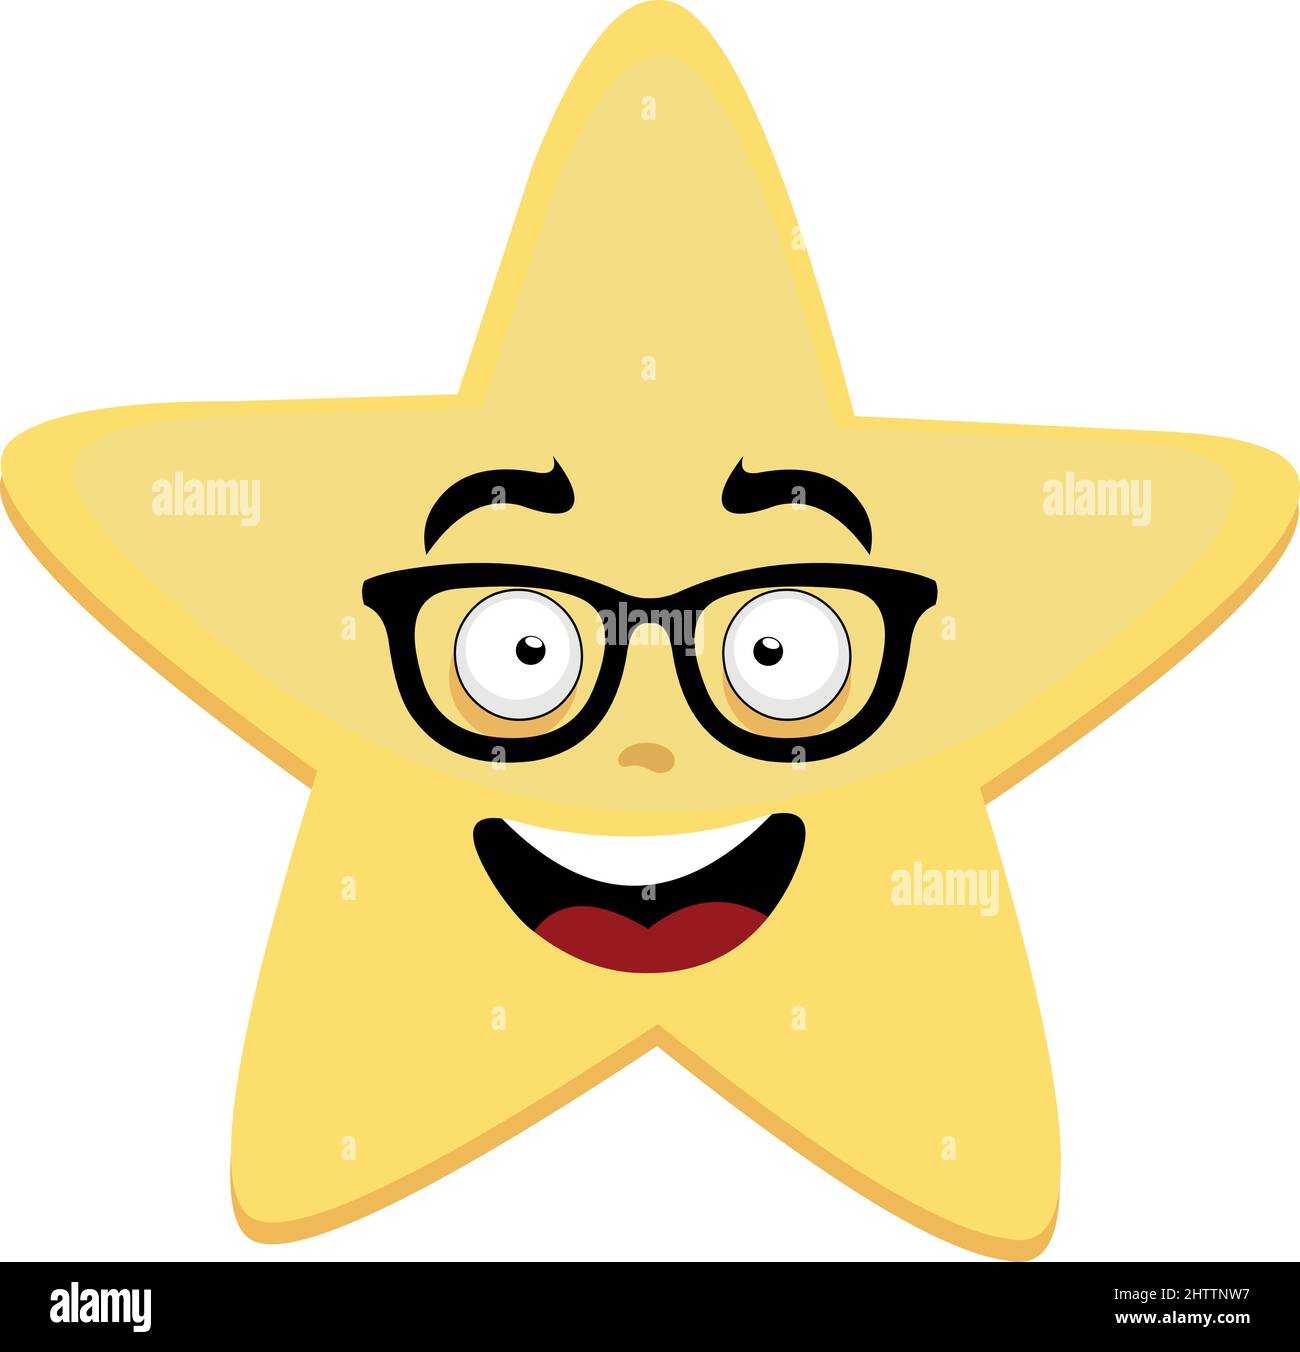 Vector character illustration of a cartoon star with a cheerful expression and nerd glasses Stock Vector